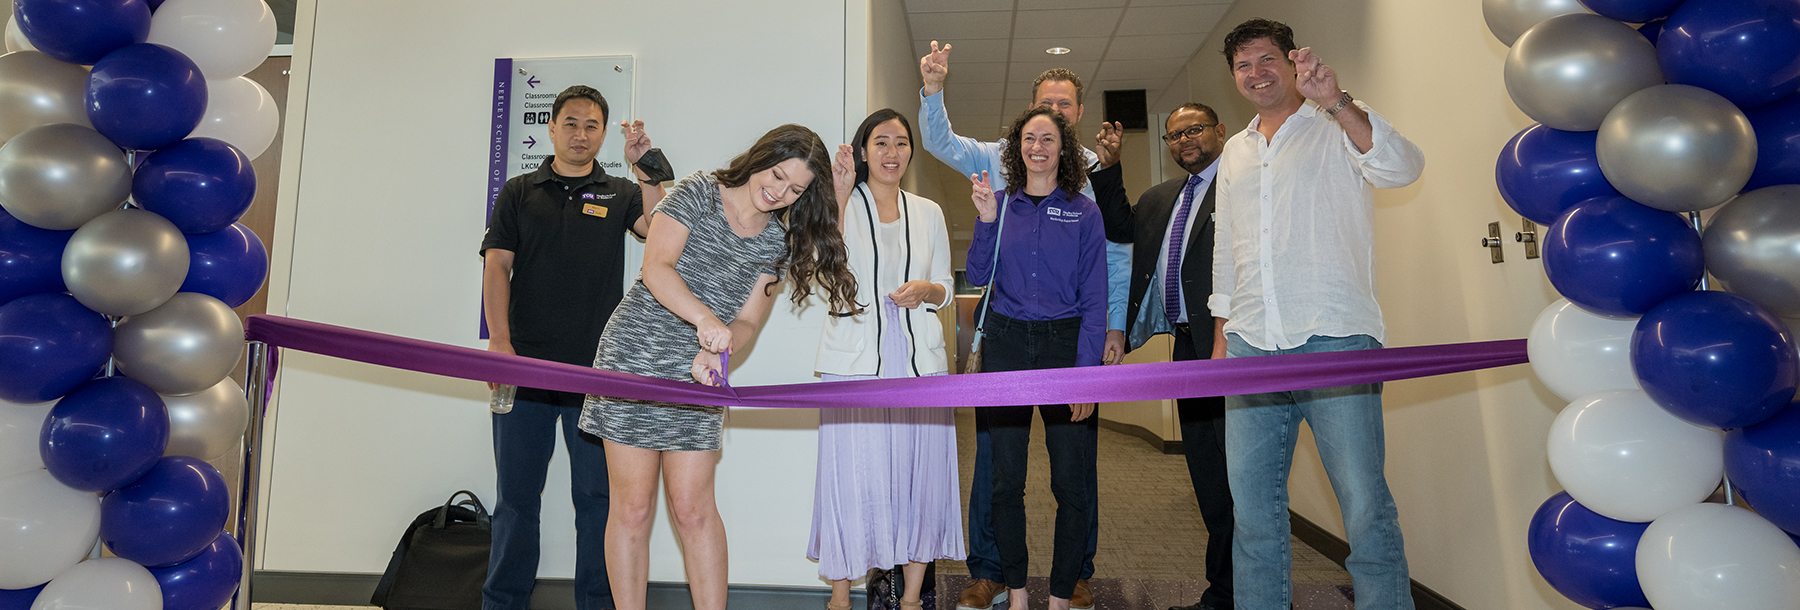 Section Image: Woman with purple scissors cuts a purple ribbon while Marketing professors with their "frogs up" outside of the Behavorial Research Lab. 